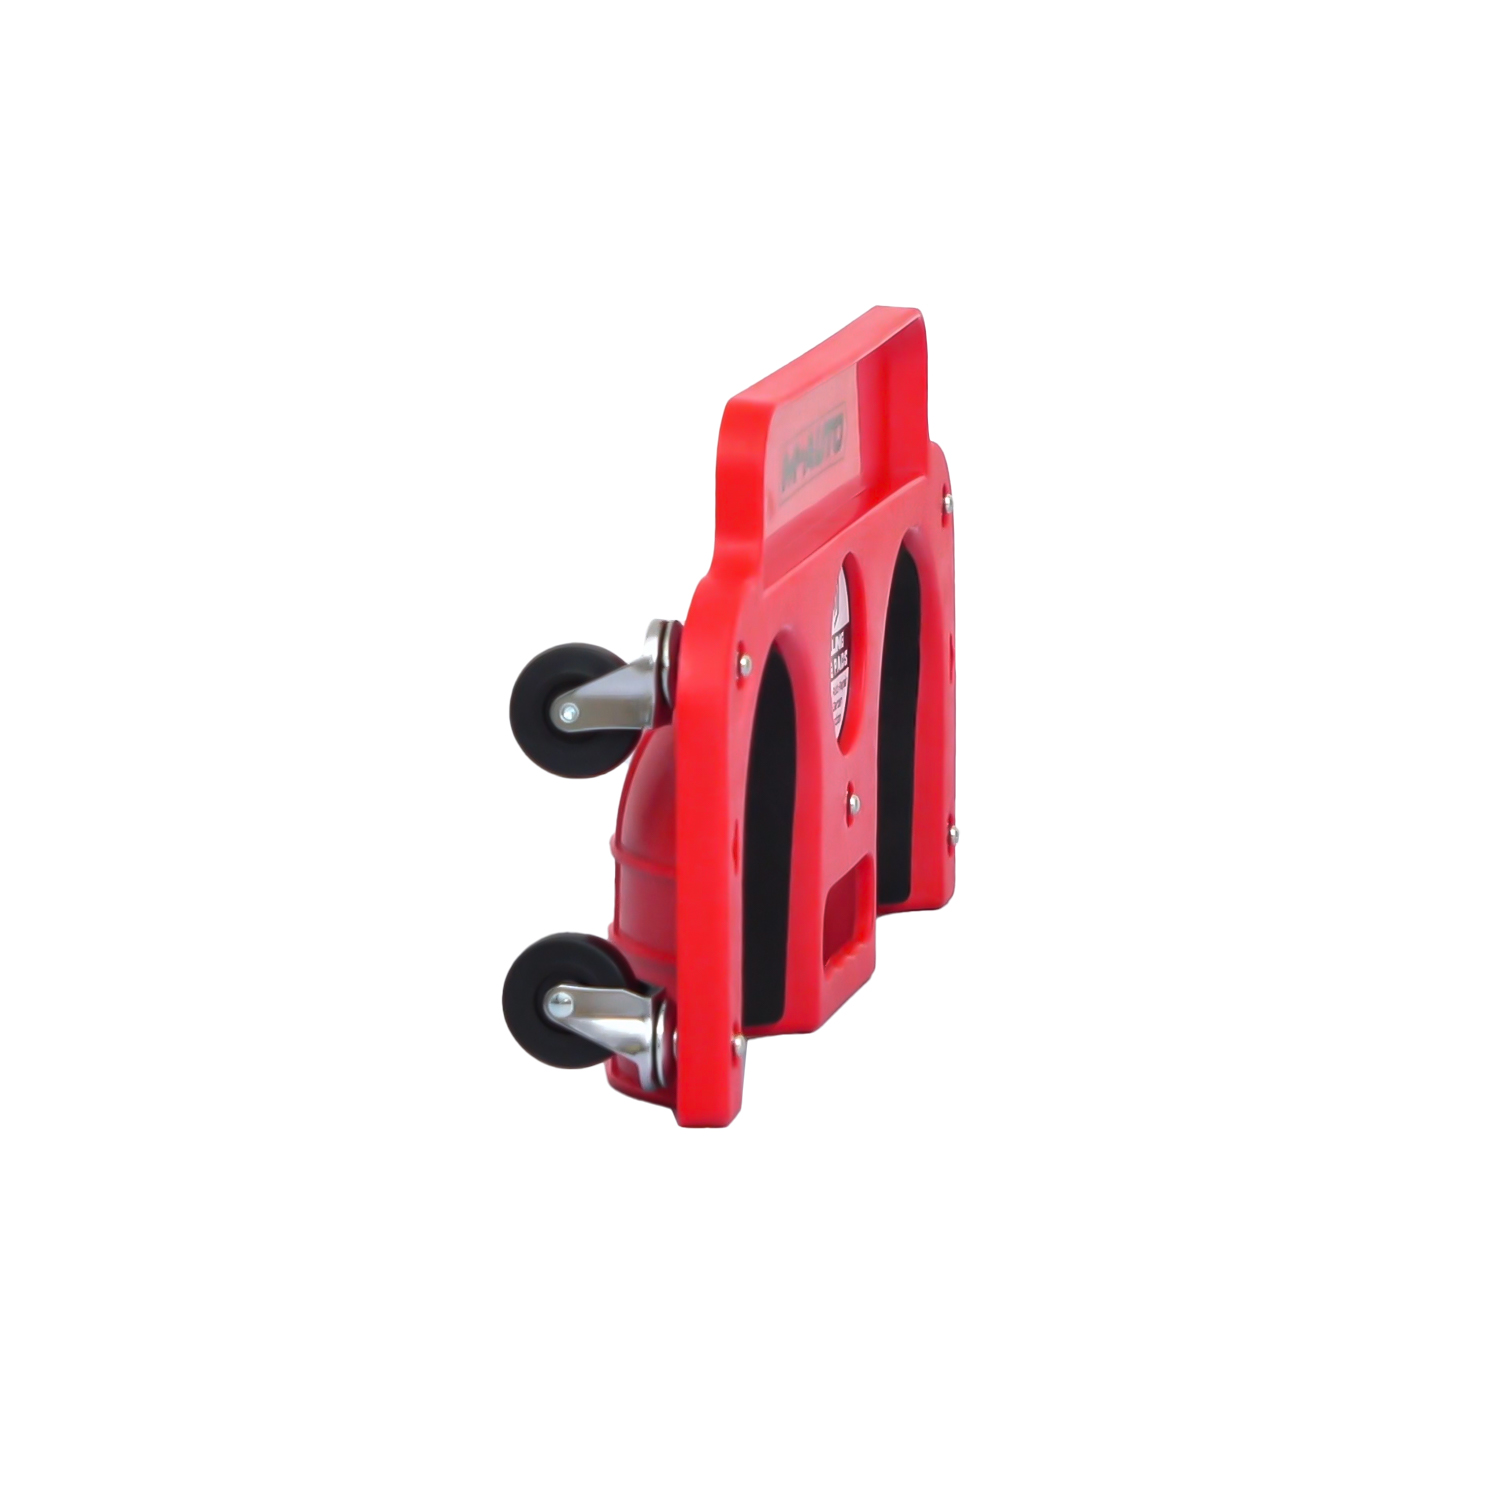 M-AUTO Rolling Knee Creeper, Convenient and Labor-saving Universal Wheel To  Move Woodworking Kneeling Pad, 200 lbs Capacity - Red 